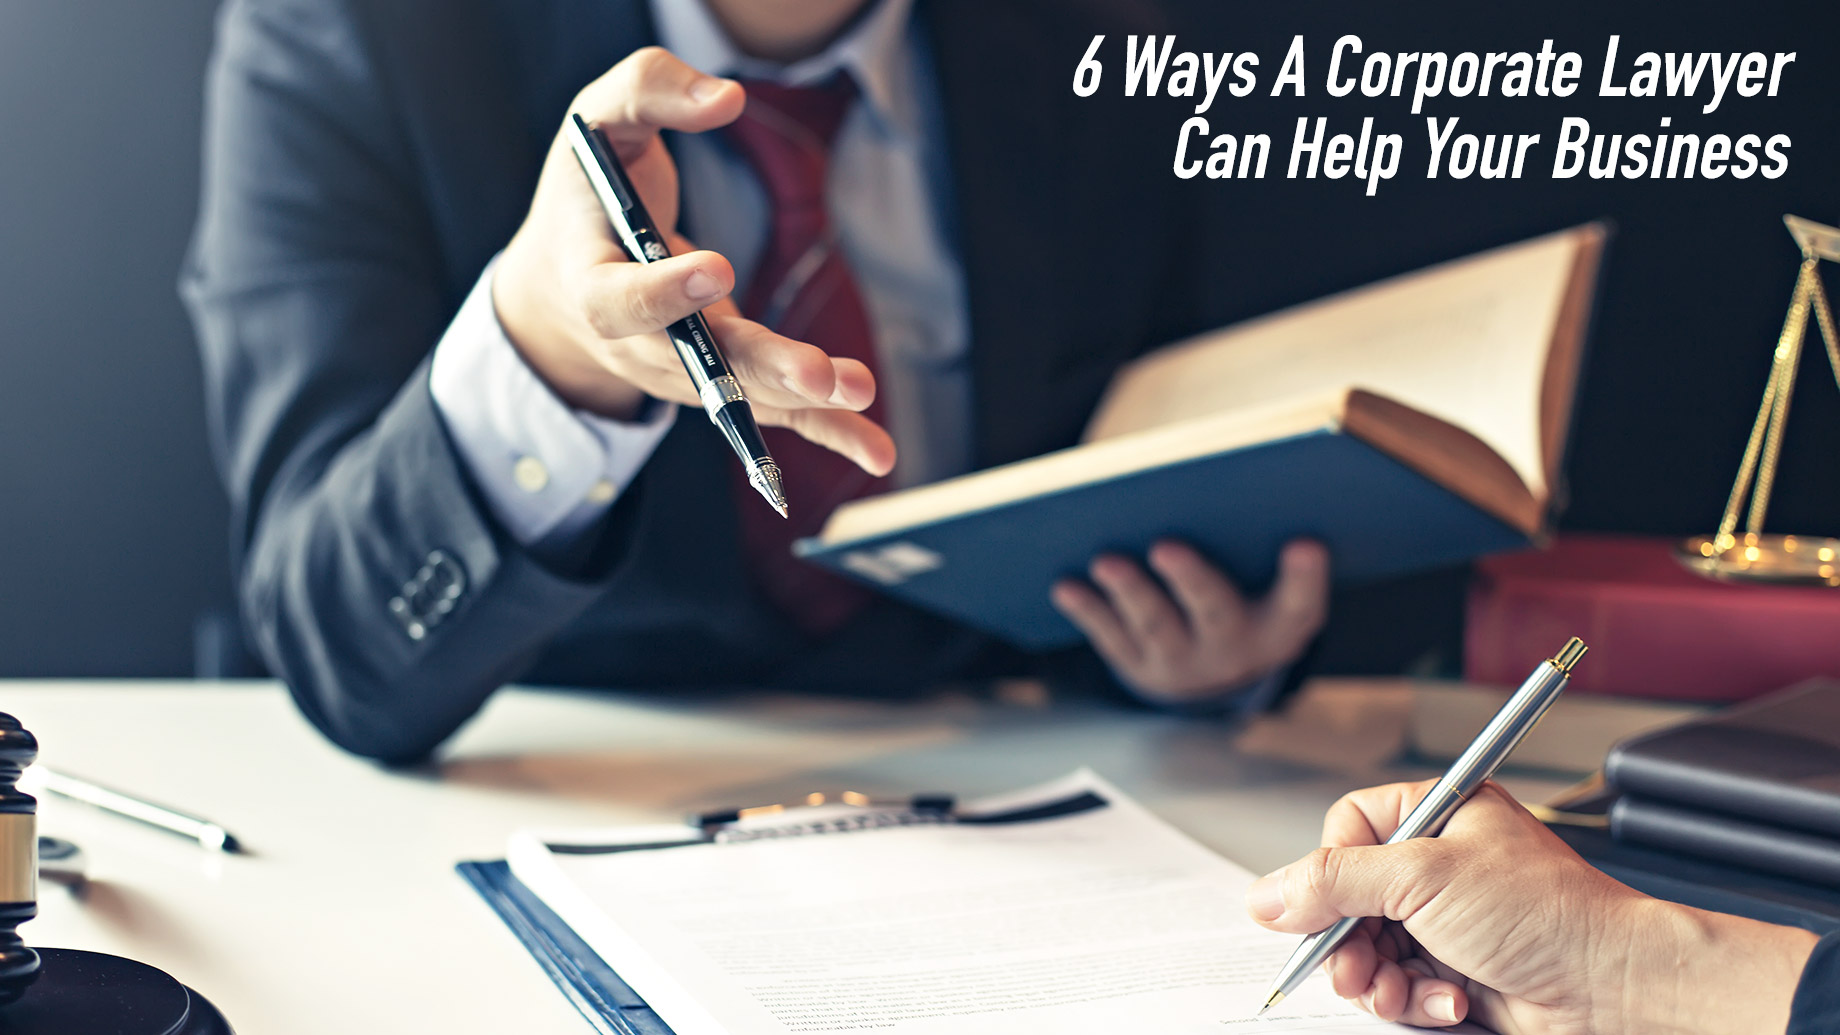 6 Ways A Corporate Lawyer Can Help Your Business